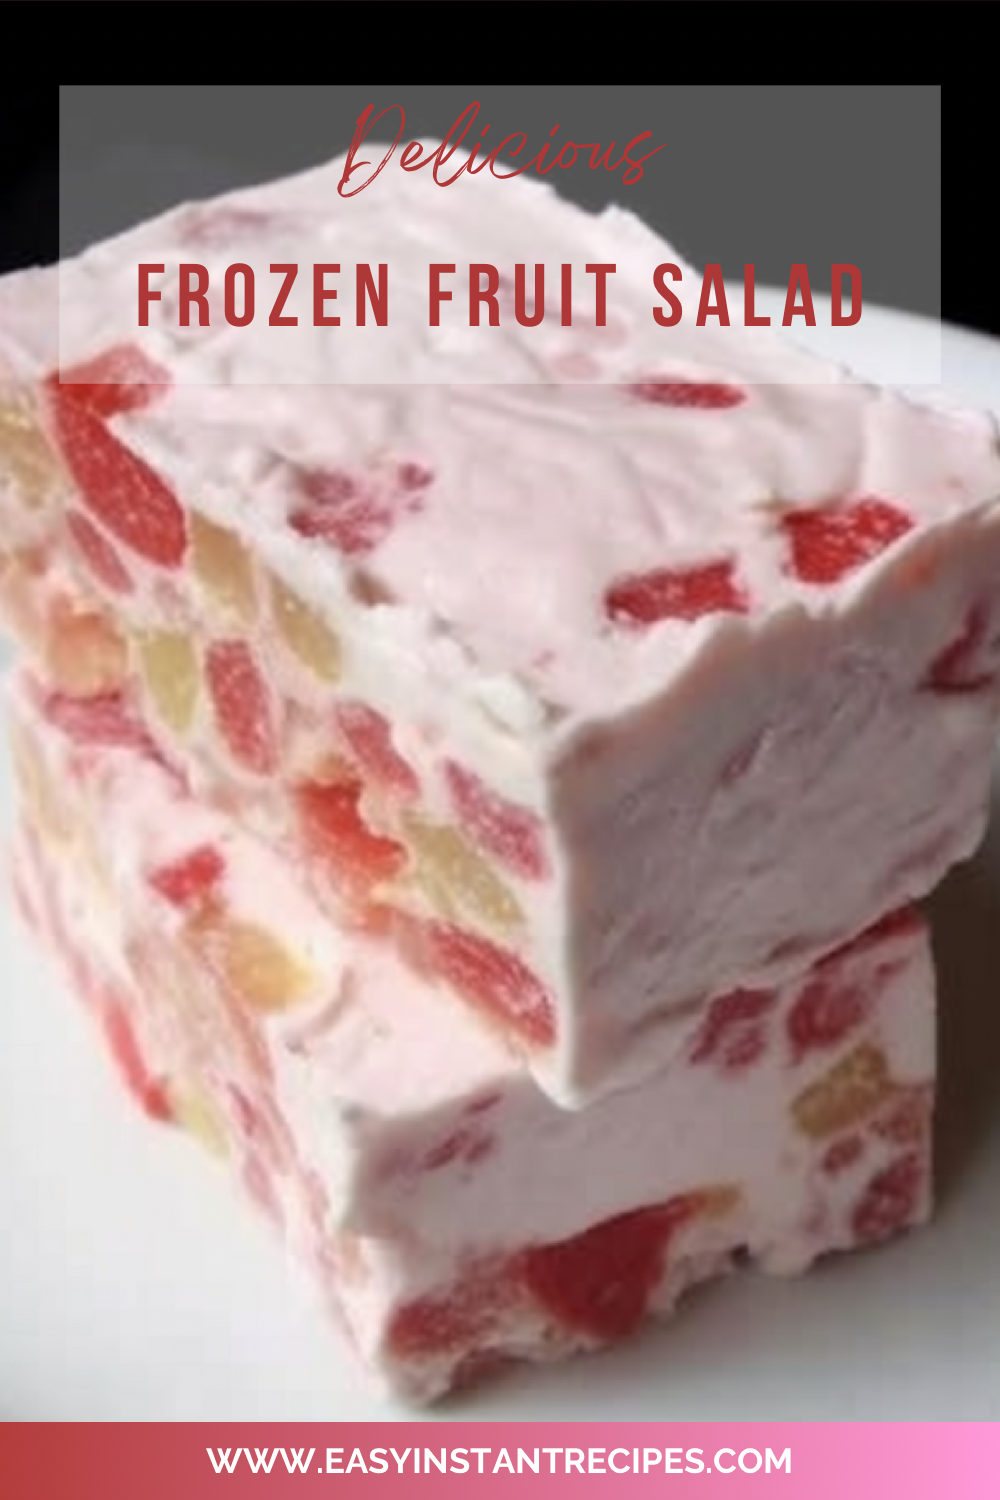 Dive into the ultimate Frozen Fruit Salad recipe! A perfect combination of cream cheese, fruits, and nuts. Click to view the full recipe and add some sweetness to your day!